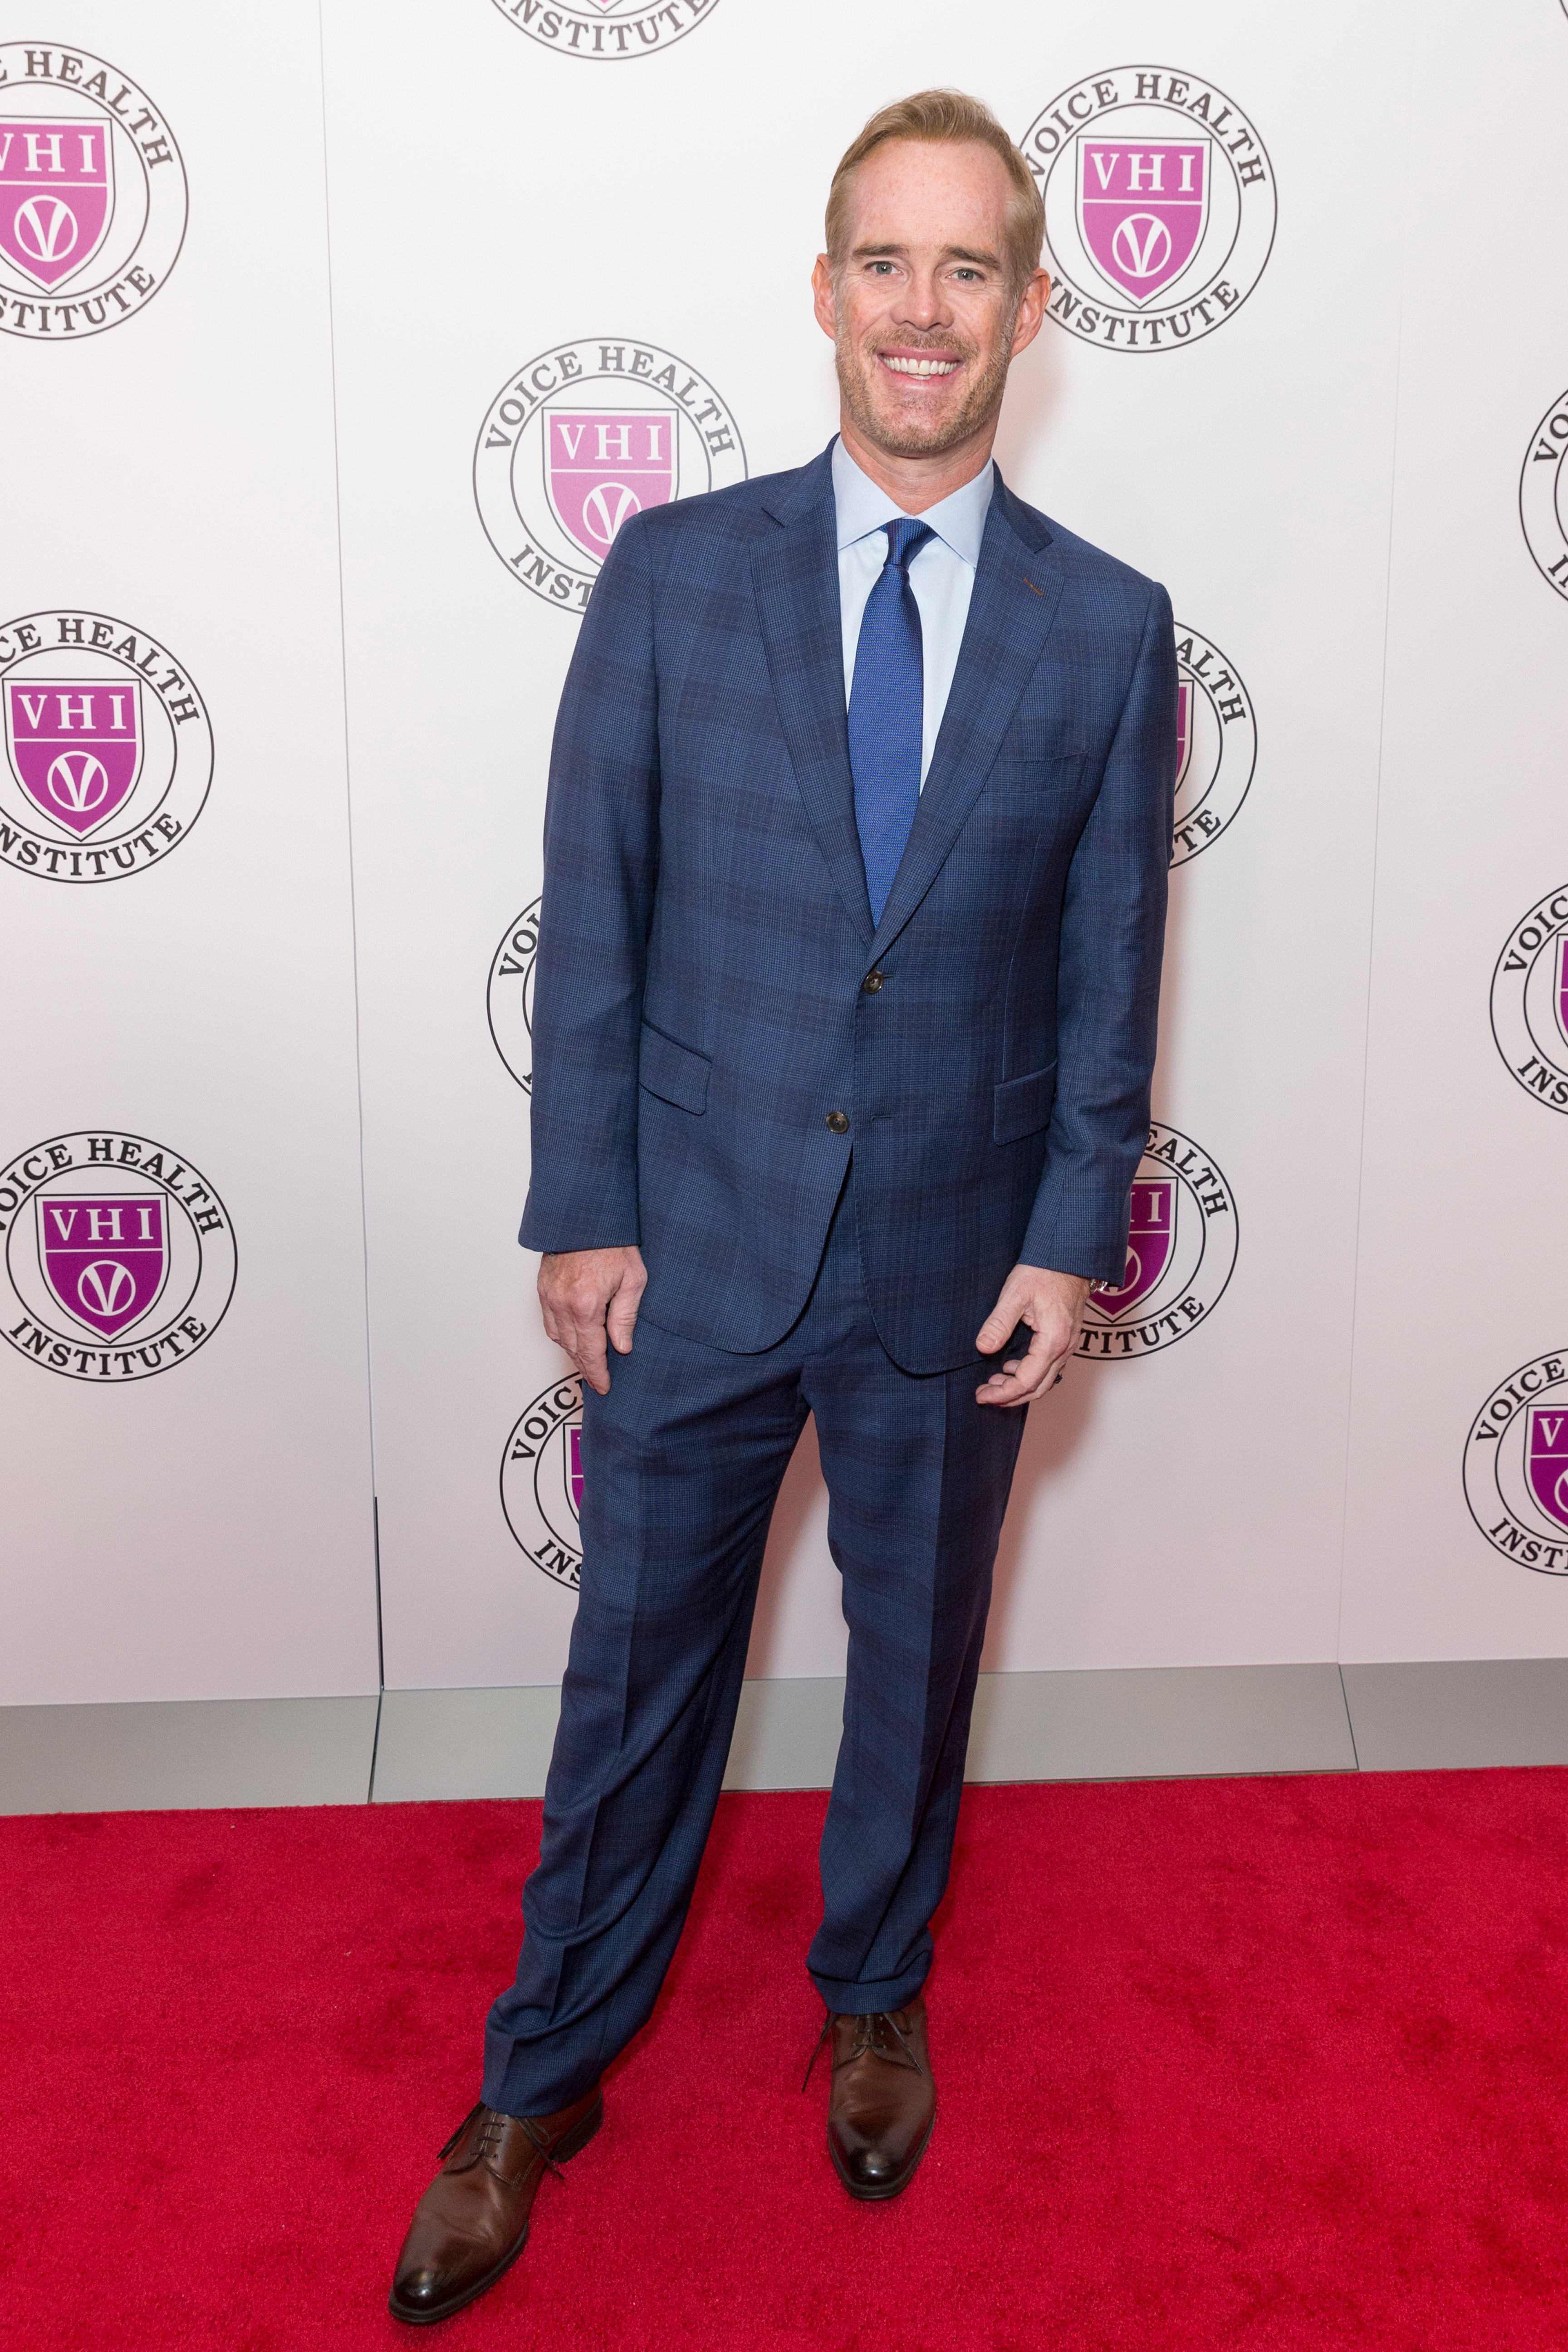 Joe Buck at the Raise Your Voice concert to benefit the 15th anniversary of the Voice Health Institute fund at Alice Tully Hall on March 5, 2018, in New York | Photo: Shutterstock/lev radin